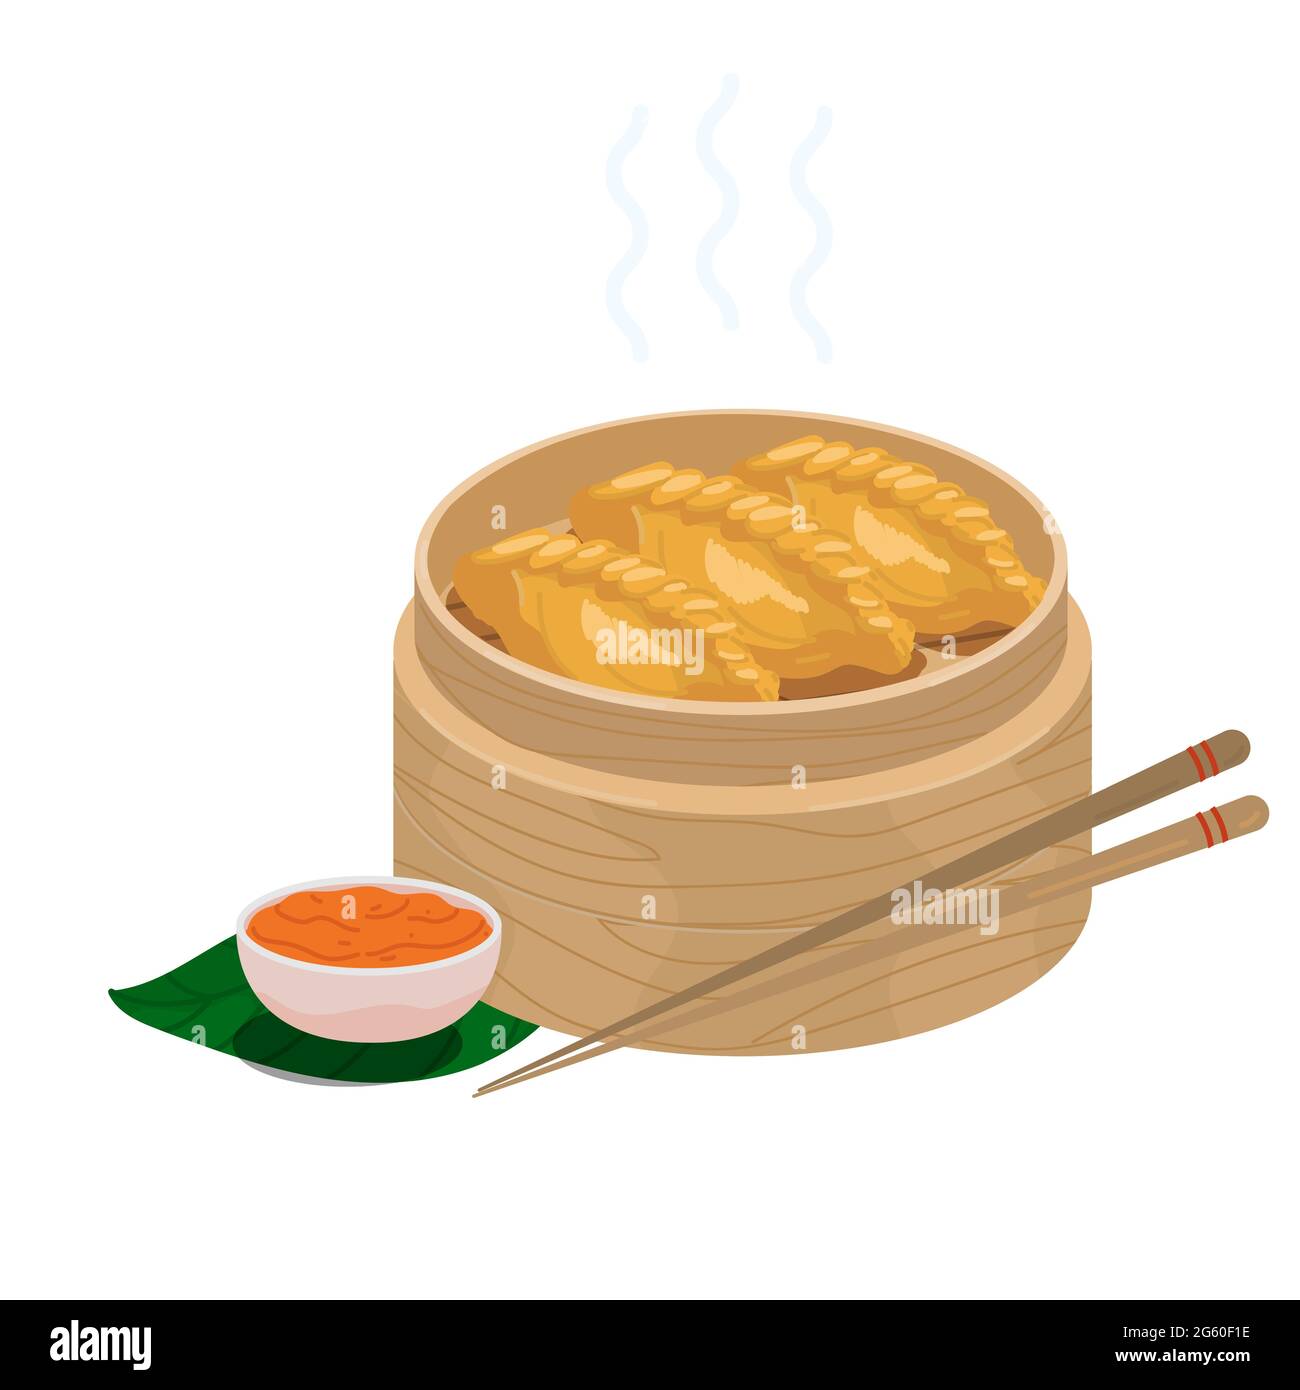 Fried momo dumplings in wooden steamer basket. Vector illustration of steam fried veg momos with sticks and chutney sauce. Nepalese momo icon dish iso Stock Vector